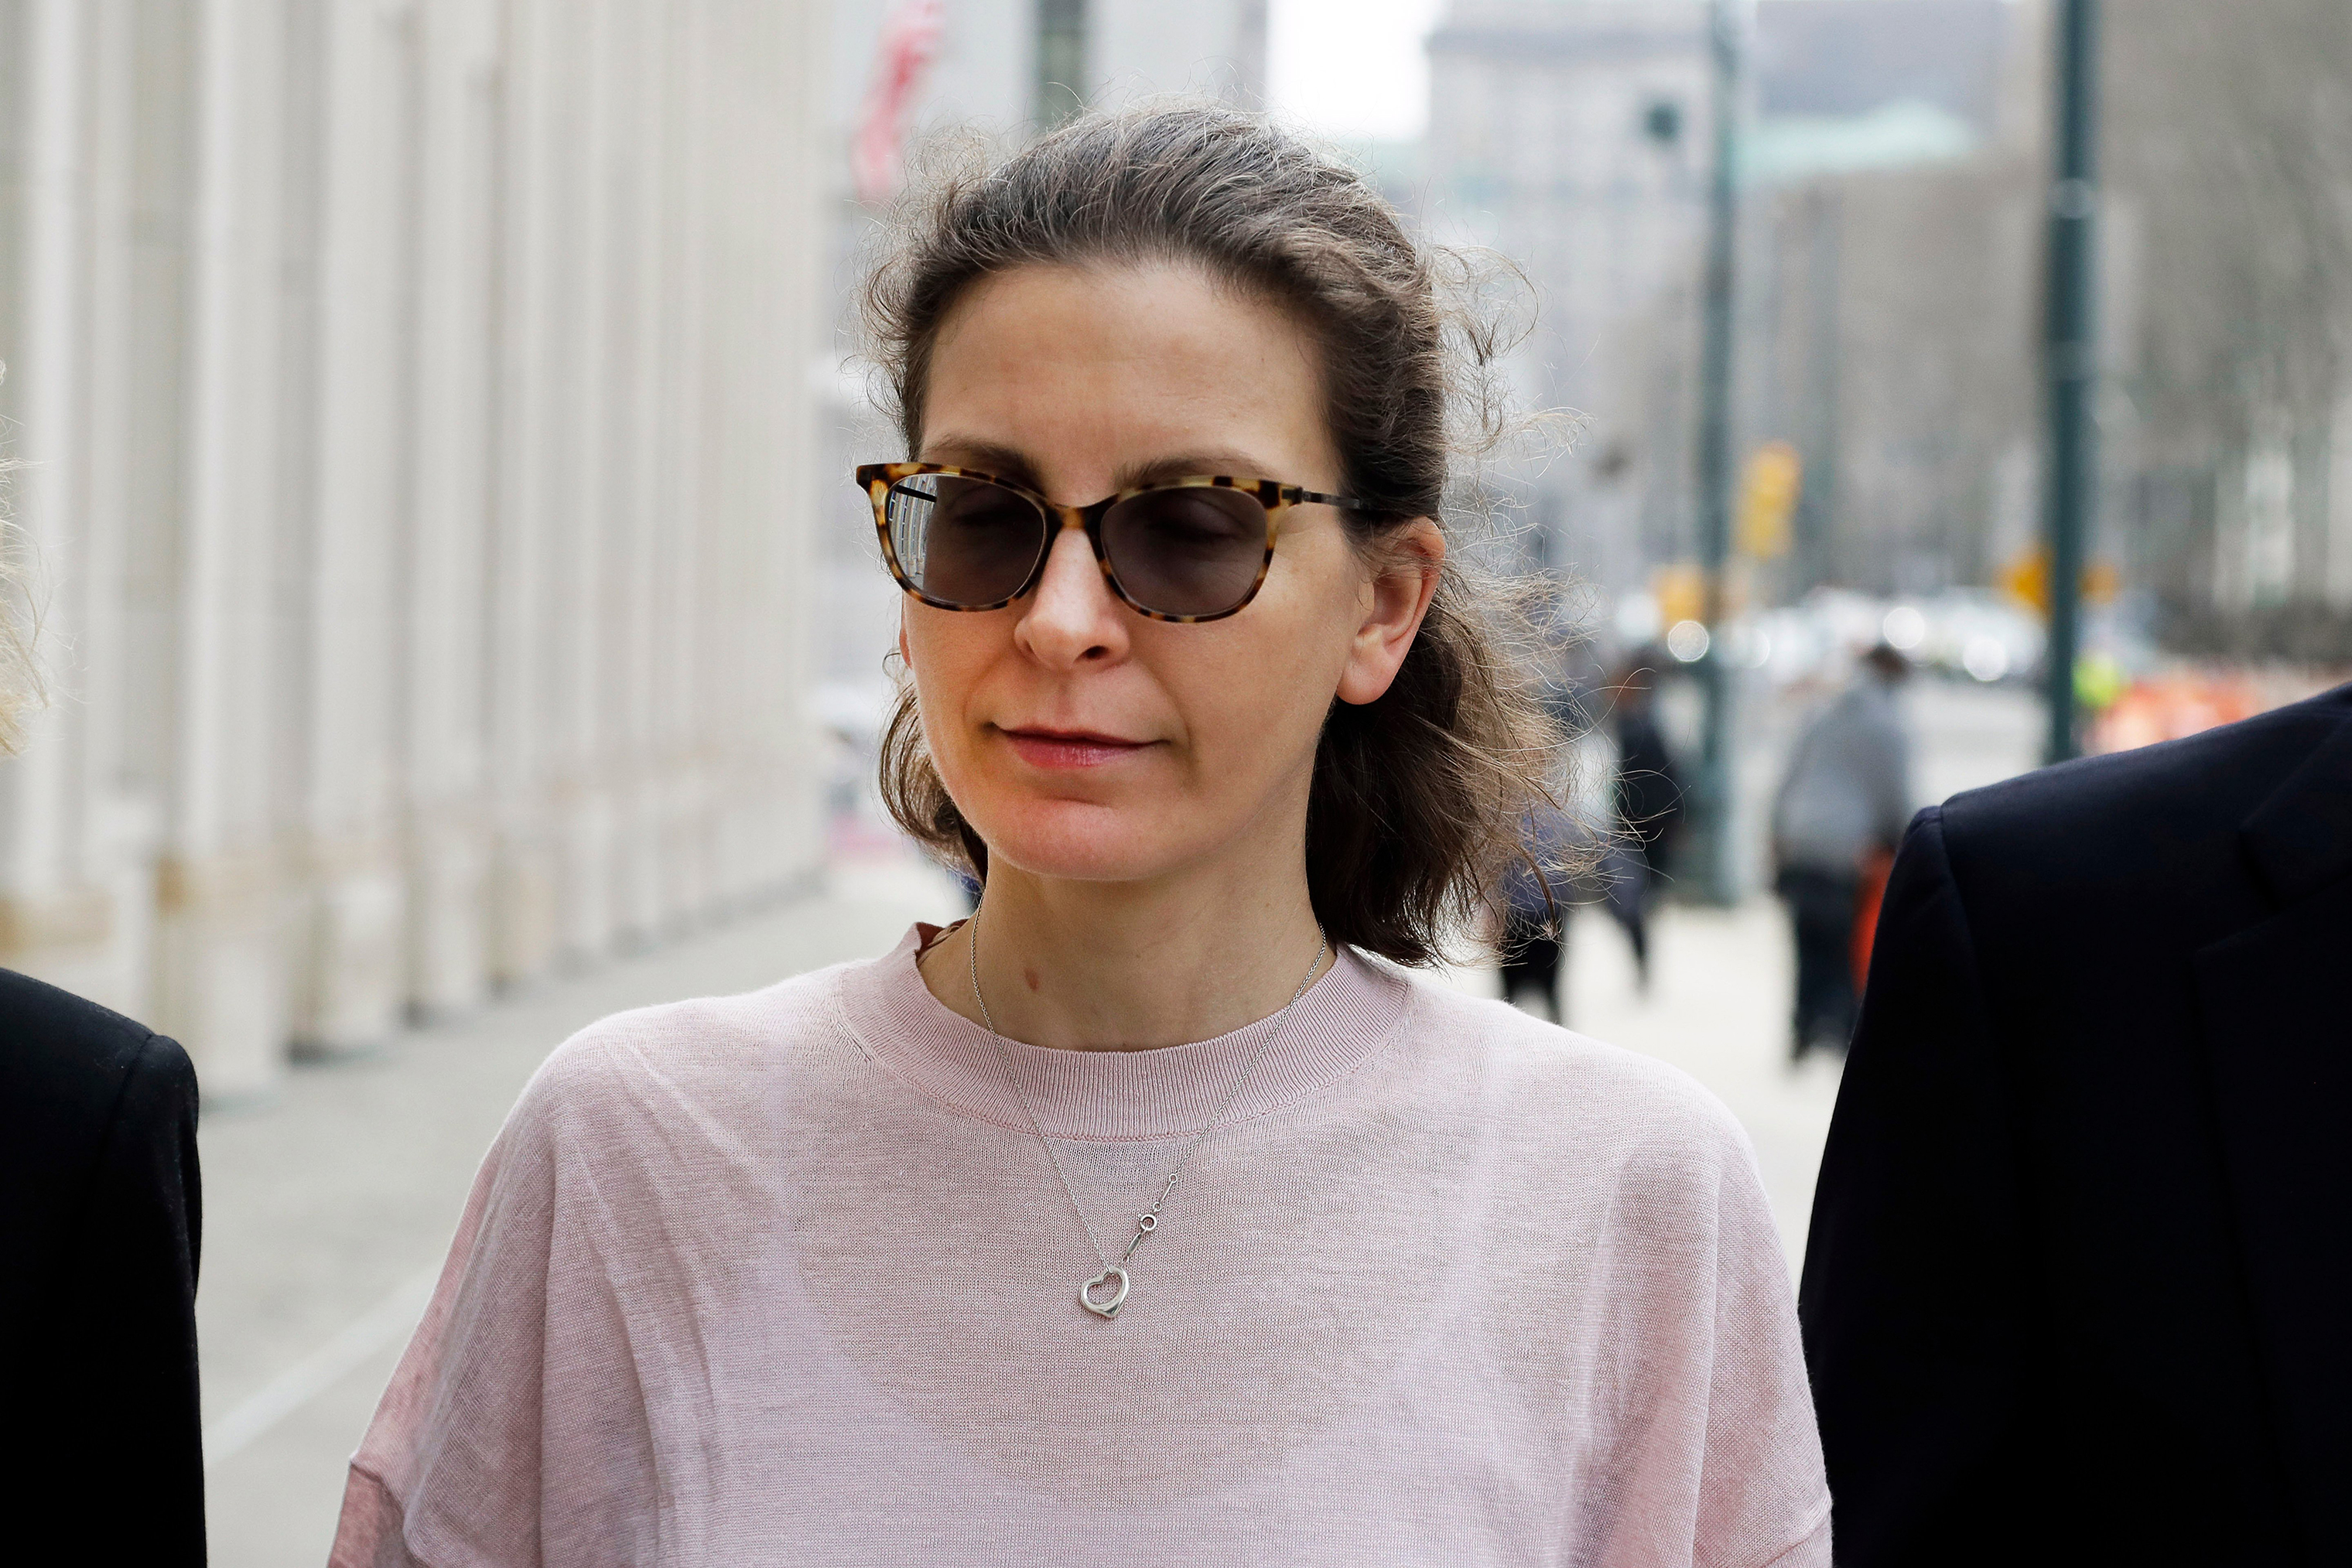 Clare Bronfman, a member of NXIVM, arrives at Brooklyn Federal Court, in New York on April 8, 2019. (Mark Lennihan—AP/Shutterstock)